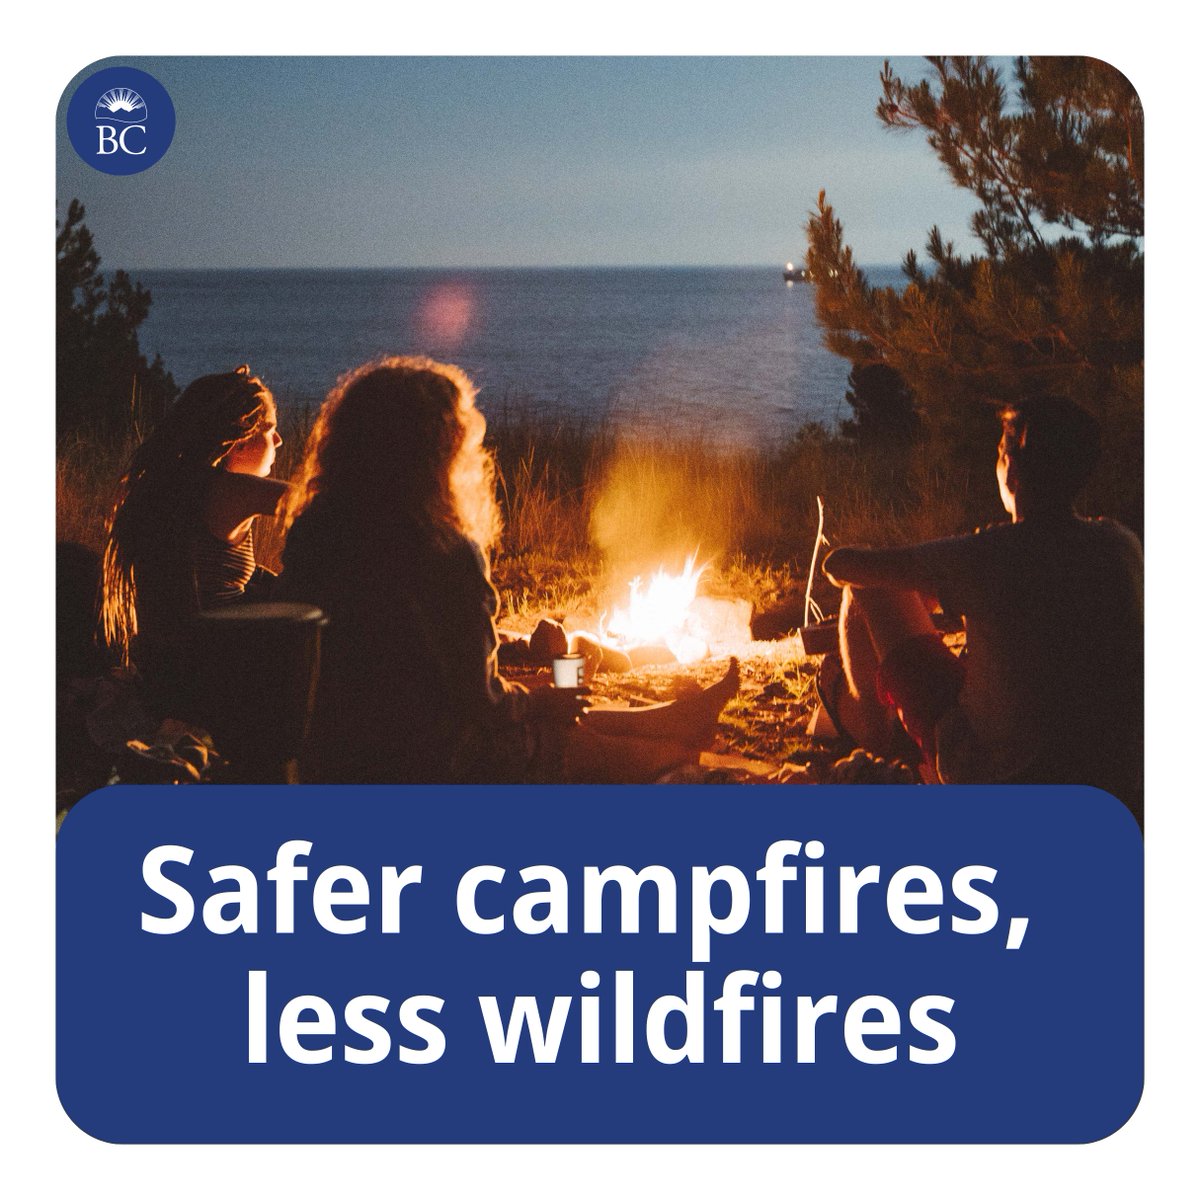 People in BC have been taking action to prevent wildfires when camping - and it's working! In recent years, there have been fewer wildfires caused by campfires. Check local conditions before you head out on the BC Wildfire Service app or at BCWildFire.ca